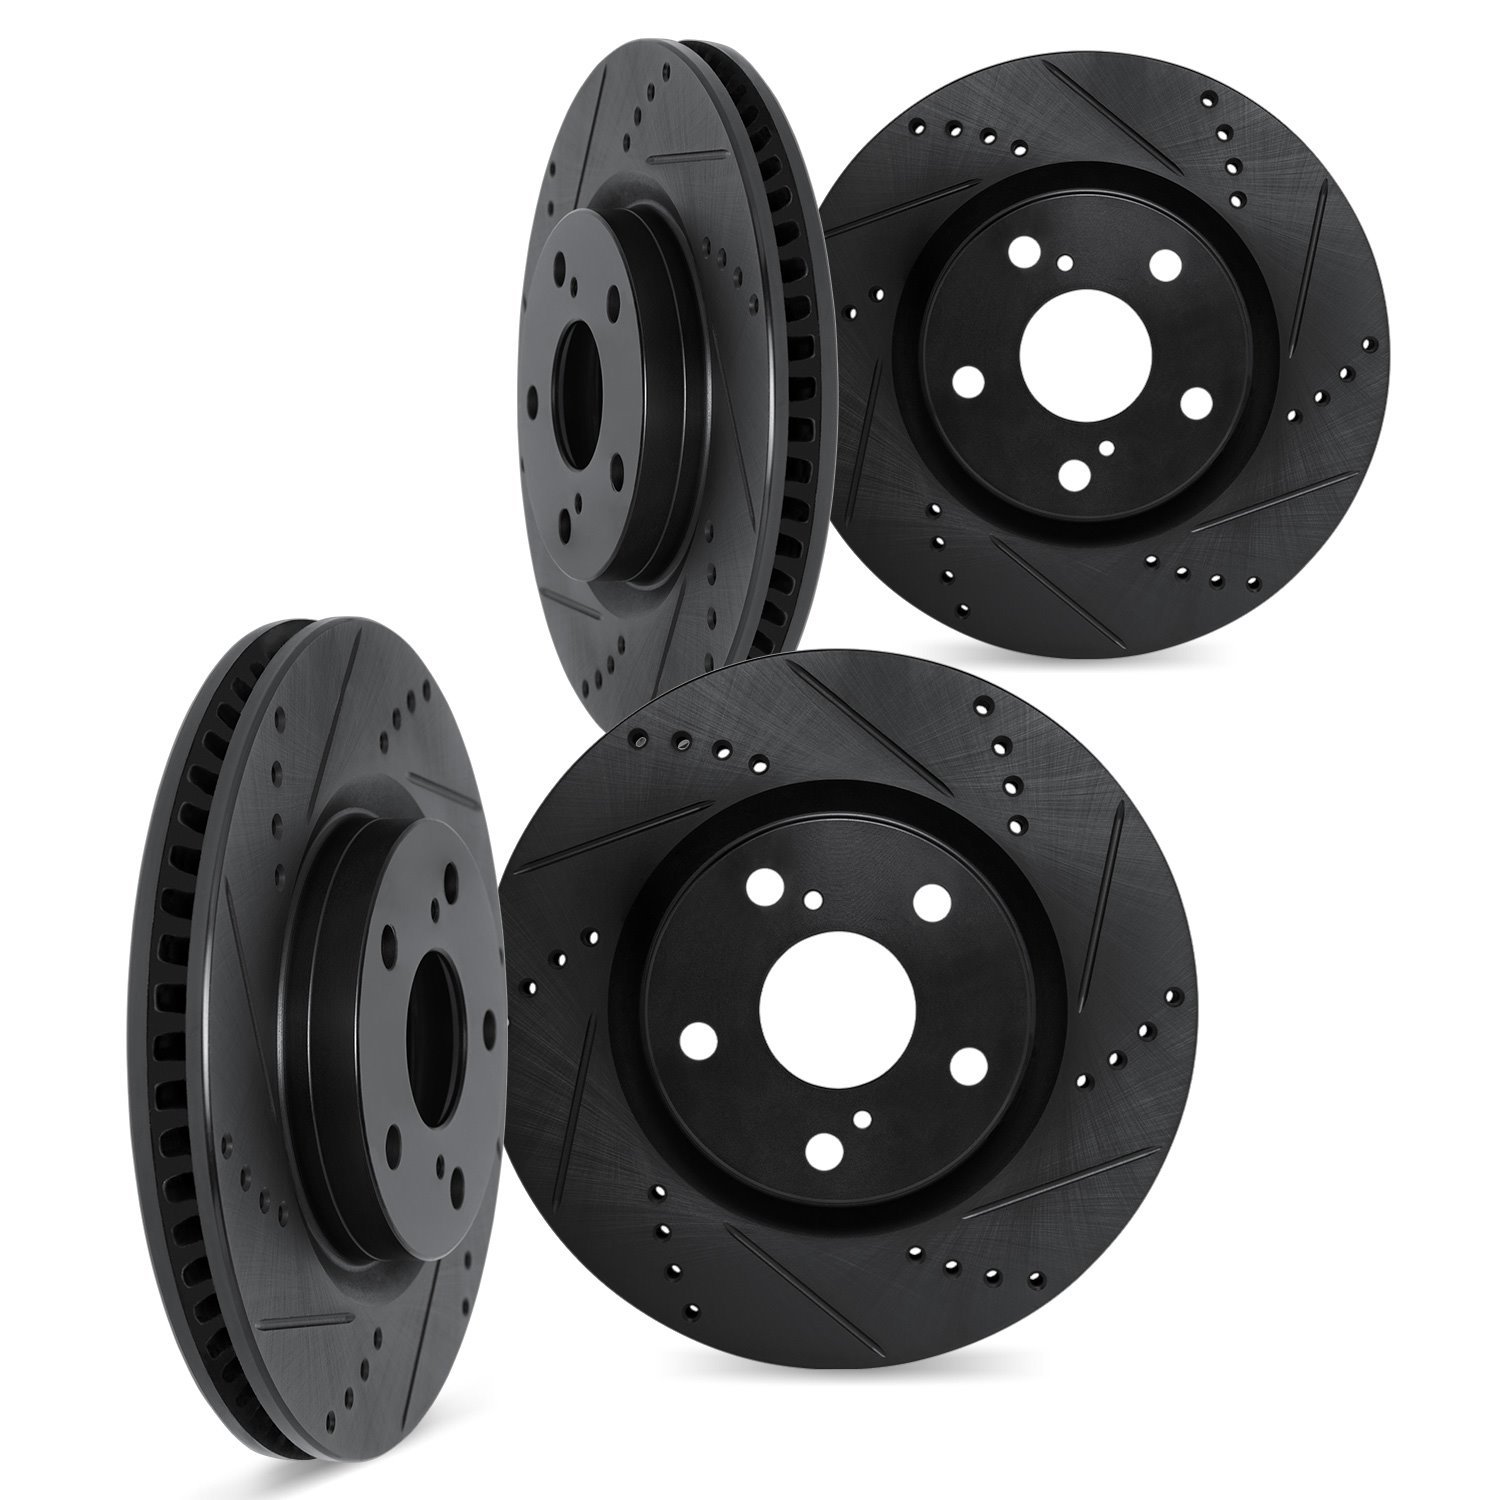 8004-45025 Drilled/Slotted Brake Rotors [Black], 1977-1977 GM, Position: Front and Rear